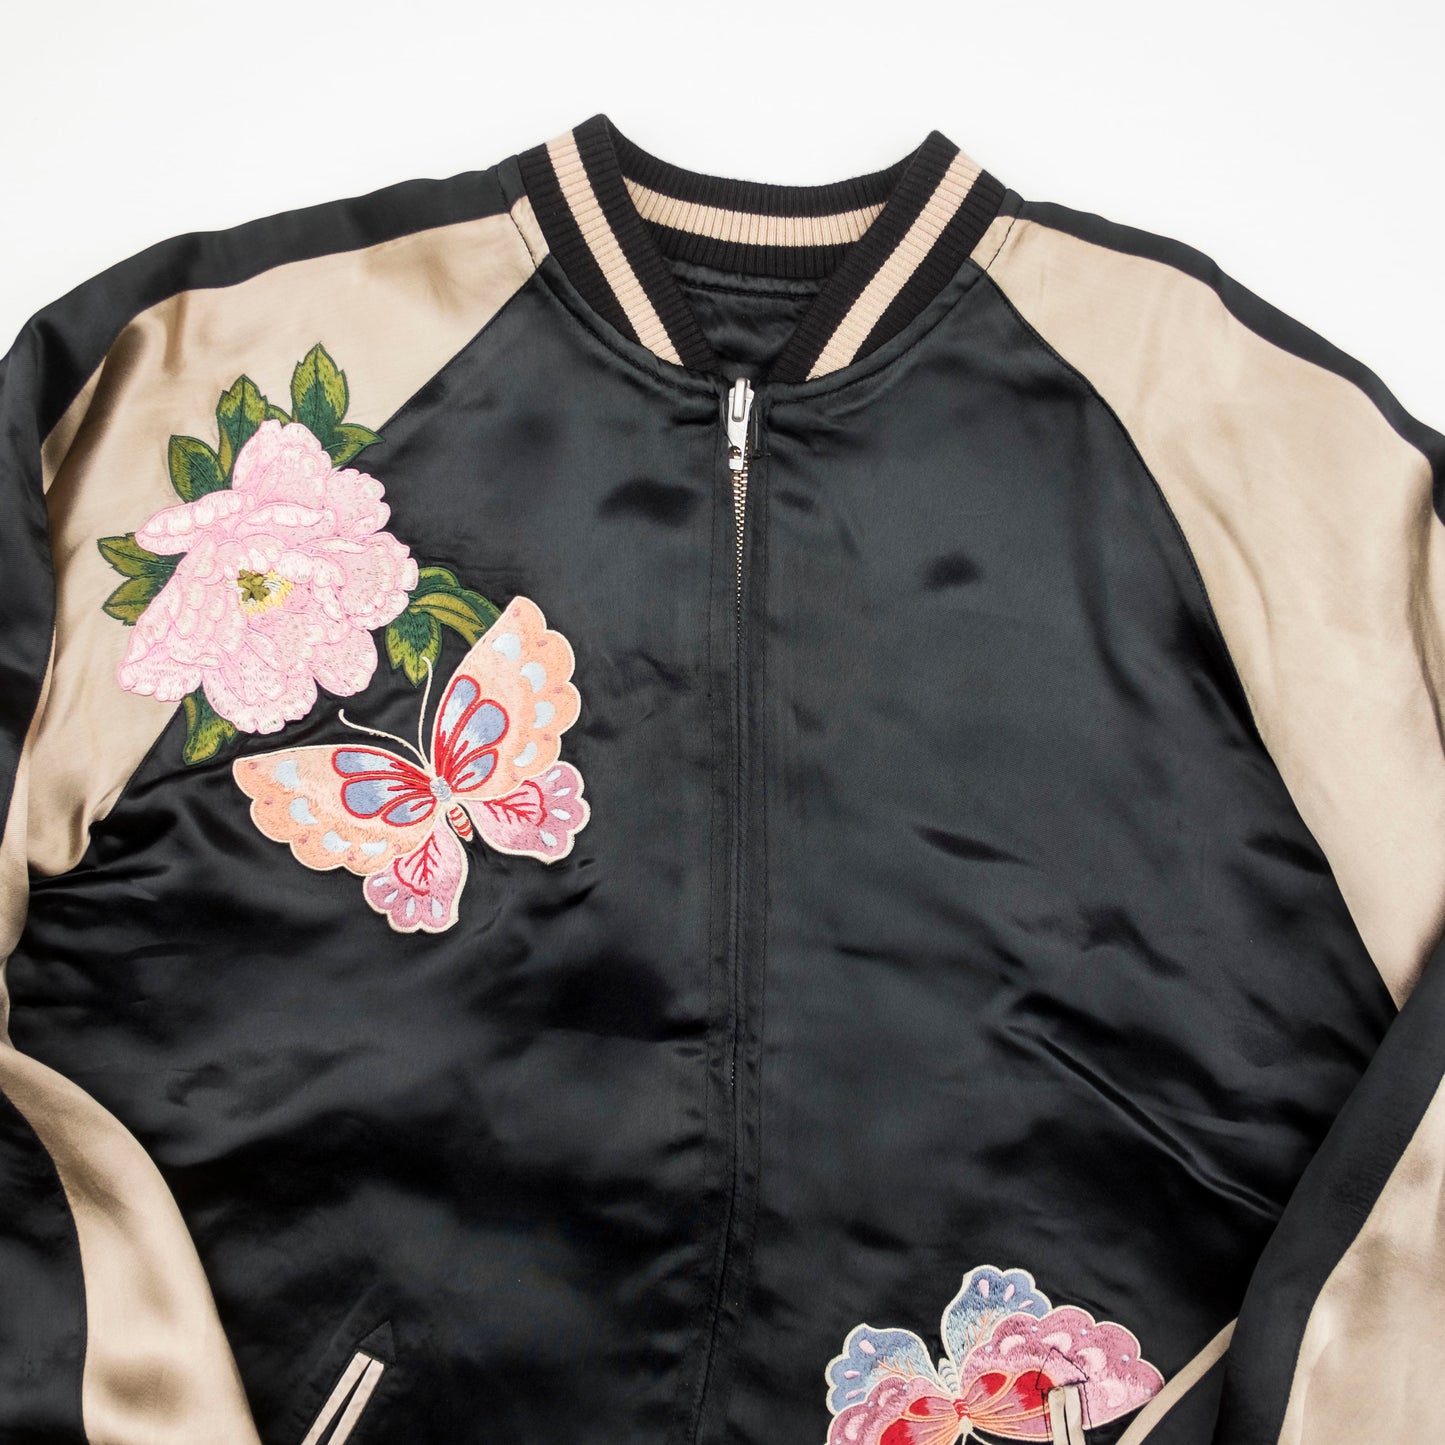 Sexy Chic Japanese Japan Butterfly Chocho Butterflies Floral Flowers Flower Garden Embroidered Embroidery Sukajan Sukajum Souvenir Reversible Jacket ( Size : L )